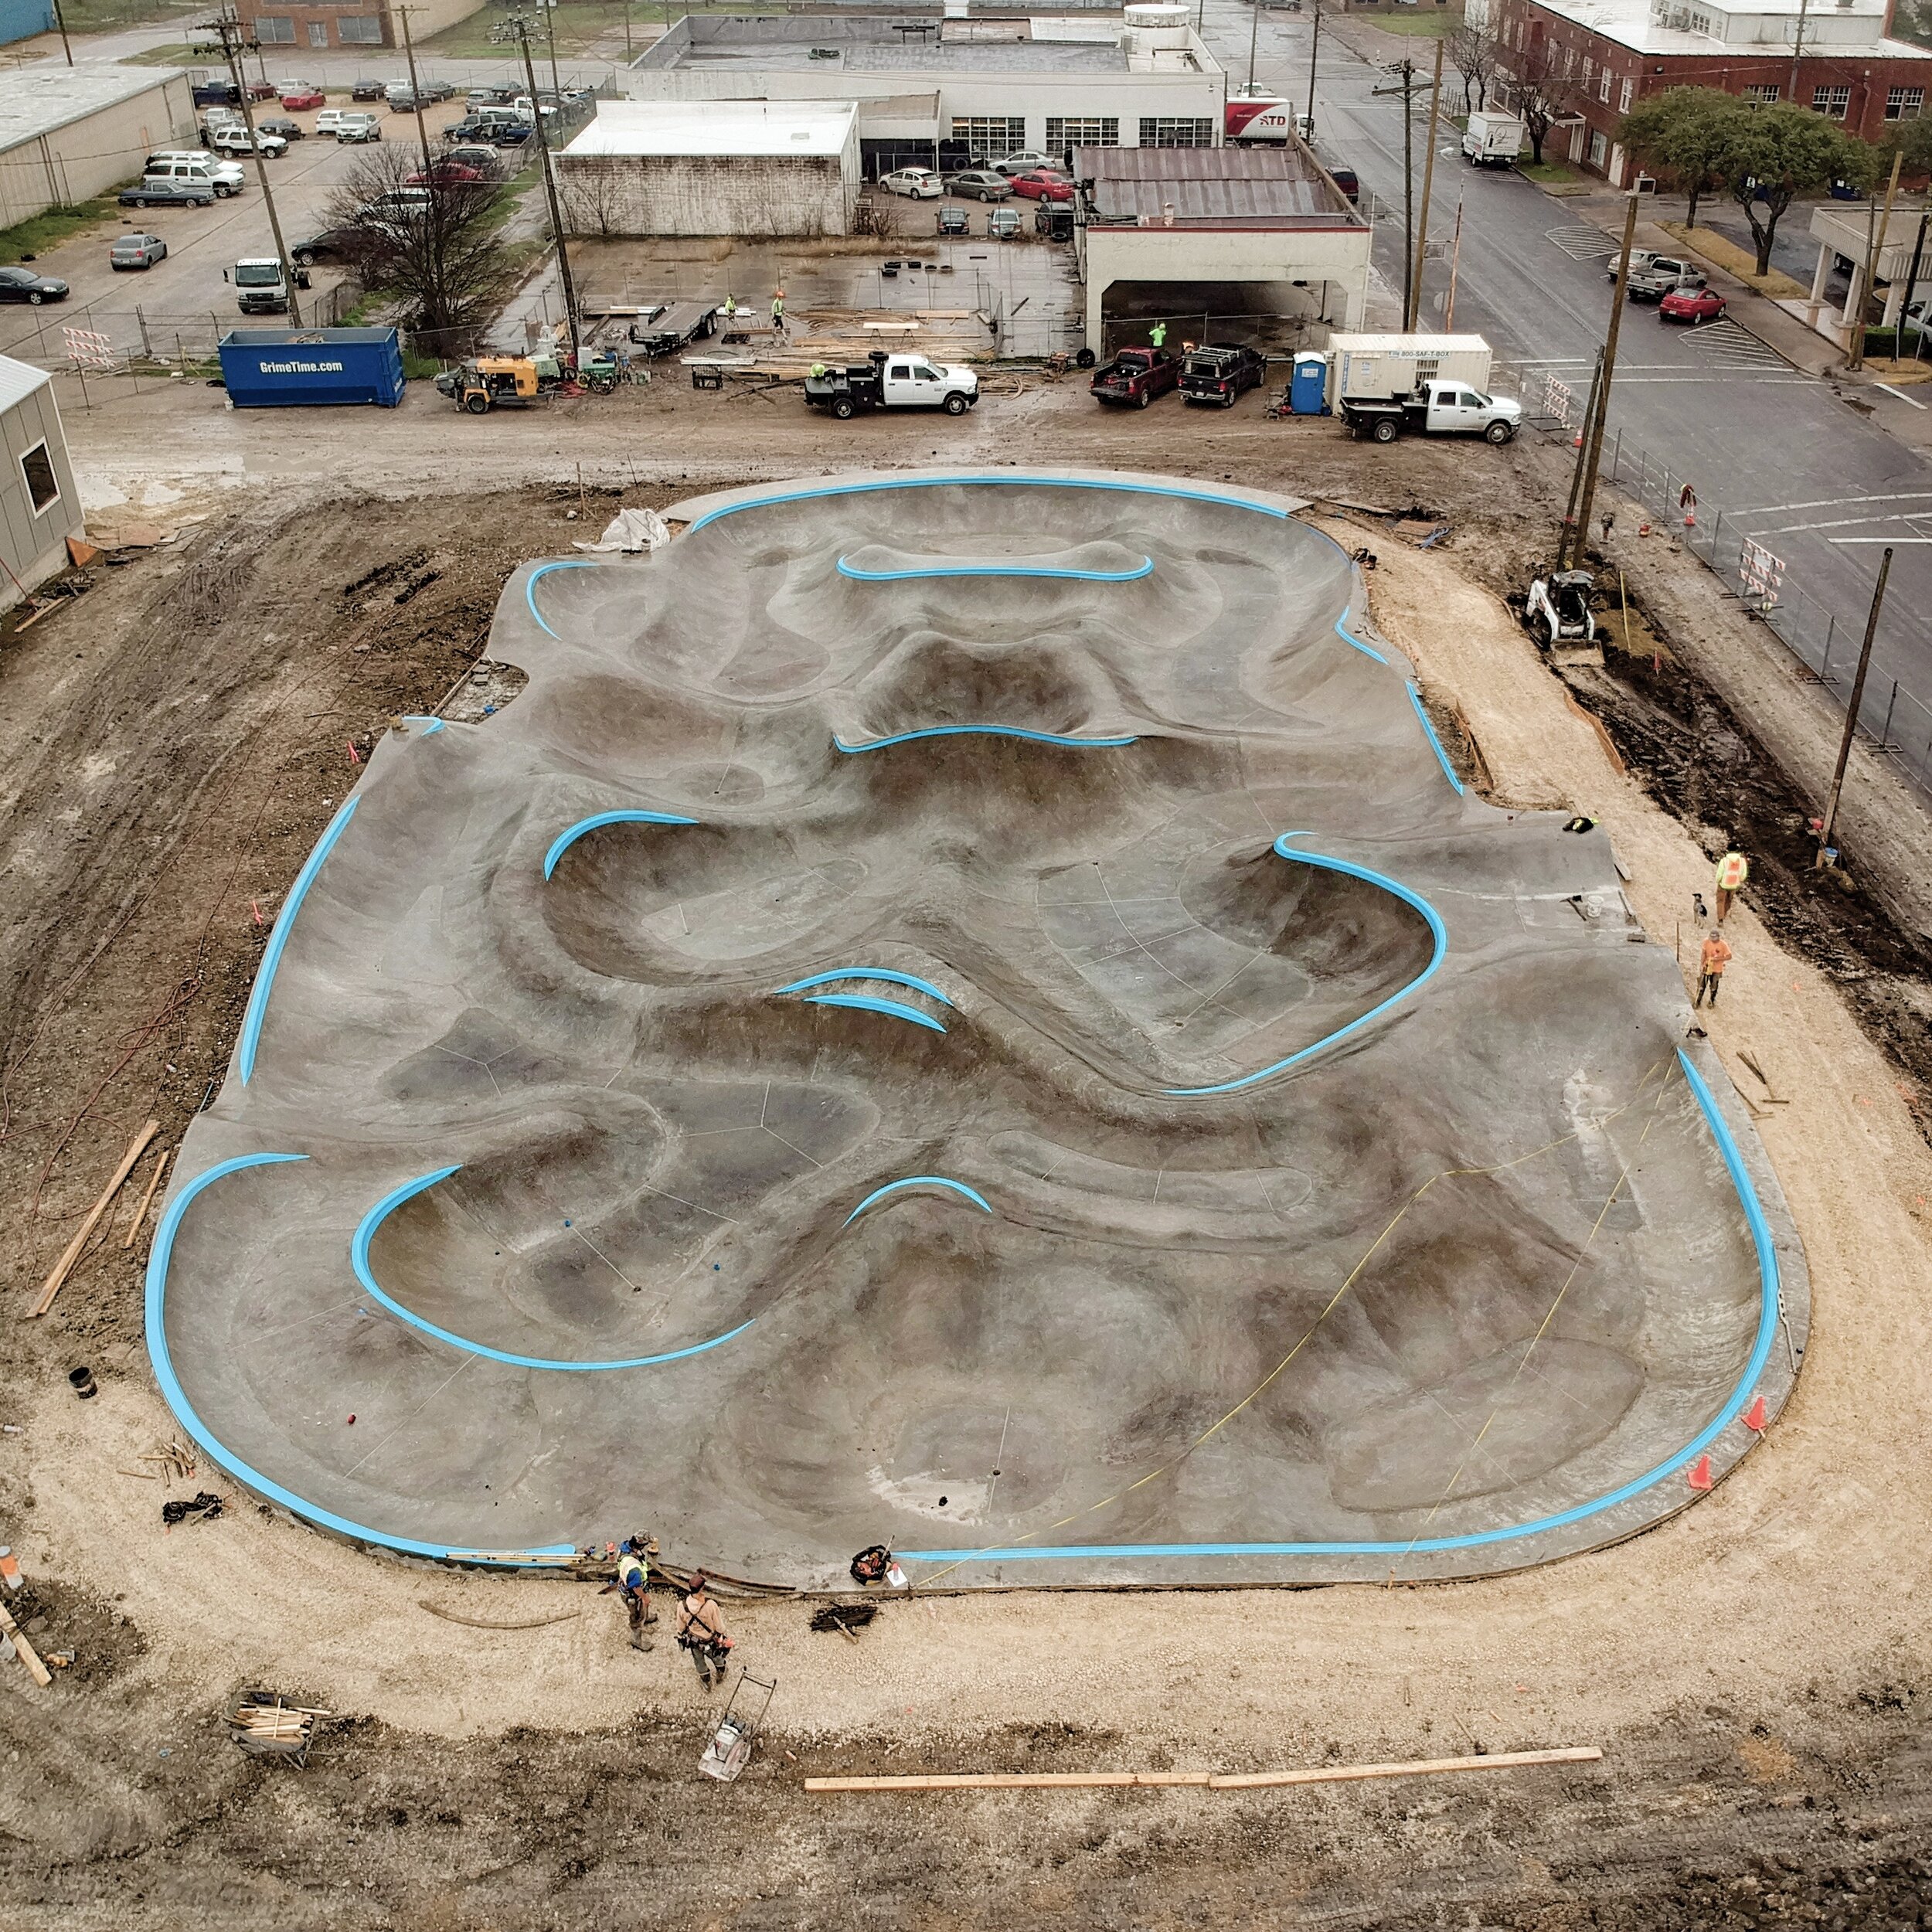 Hard to believe it was 3 years ago already when we were constructing the Taylor, Texas skatepark! Throwback to 2018 when we had completed the main section of the park 💪🏽💯